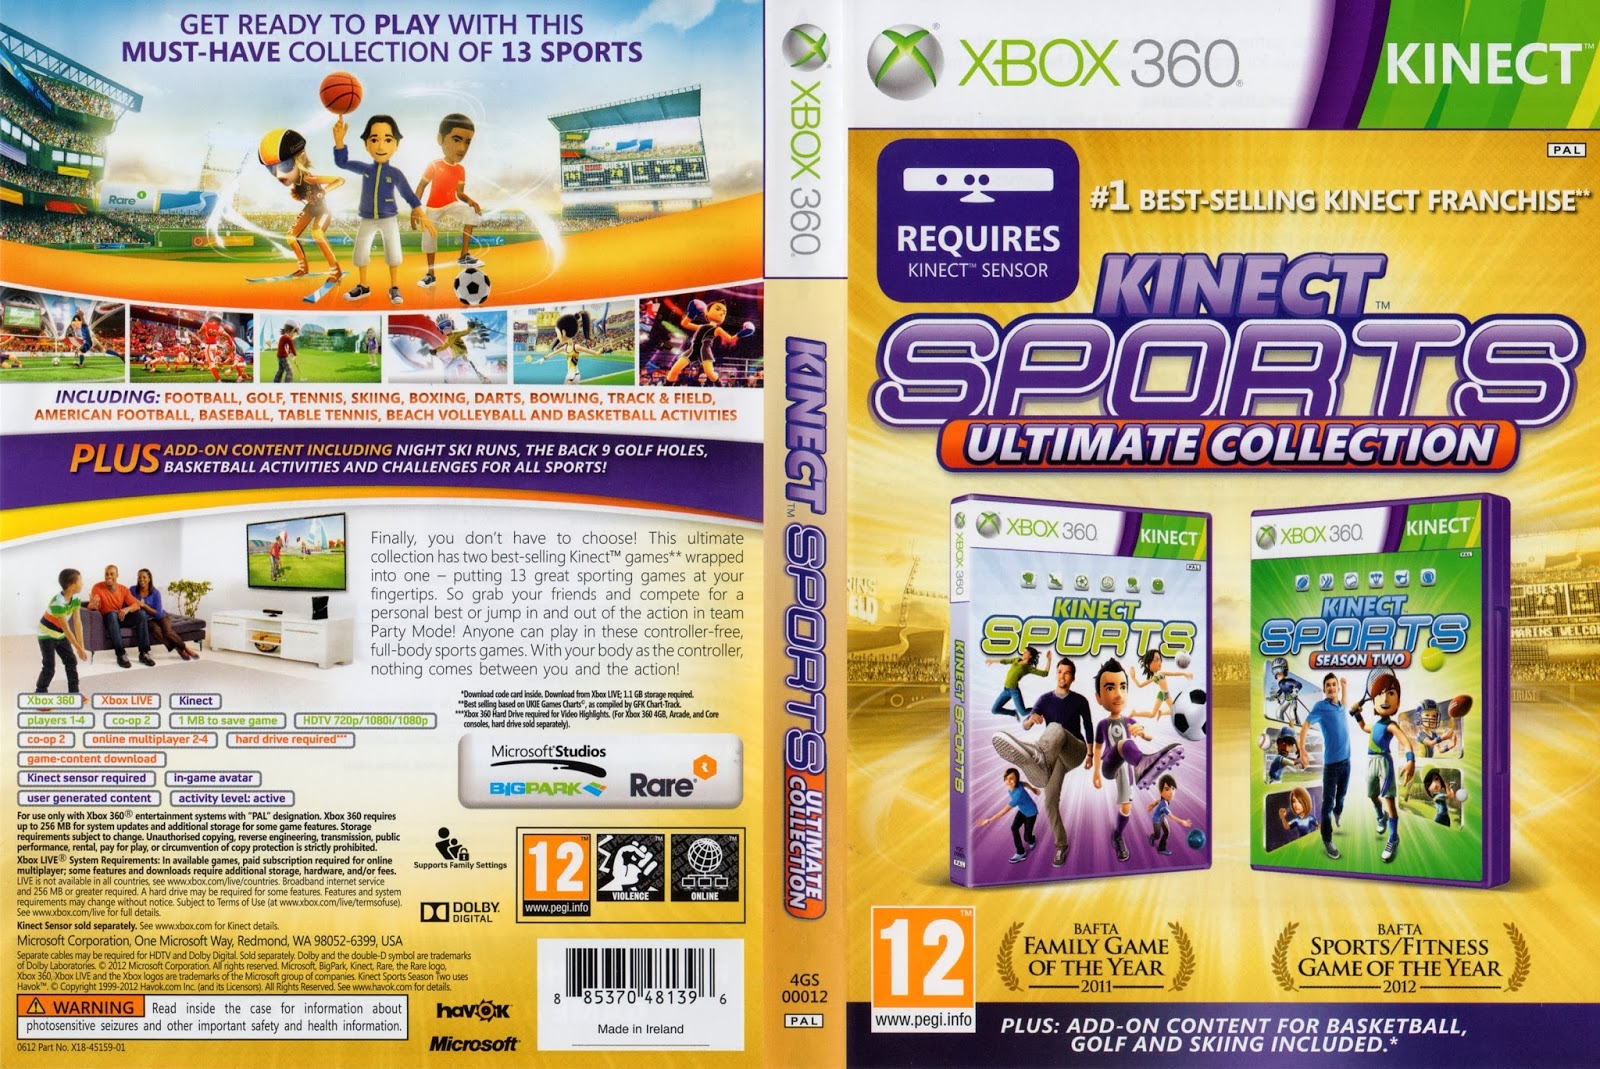 Xbox 360 русский язык игры. Kinect Sports Ultimate collection Xbox 360. Kinect Sports Xbox 360 обложка. Xbox 360 Kinect Sports Ultimate. Диск для Икс бокс 360 кинект диск спорт.